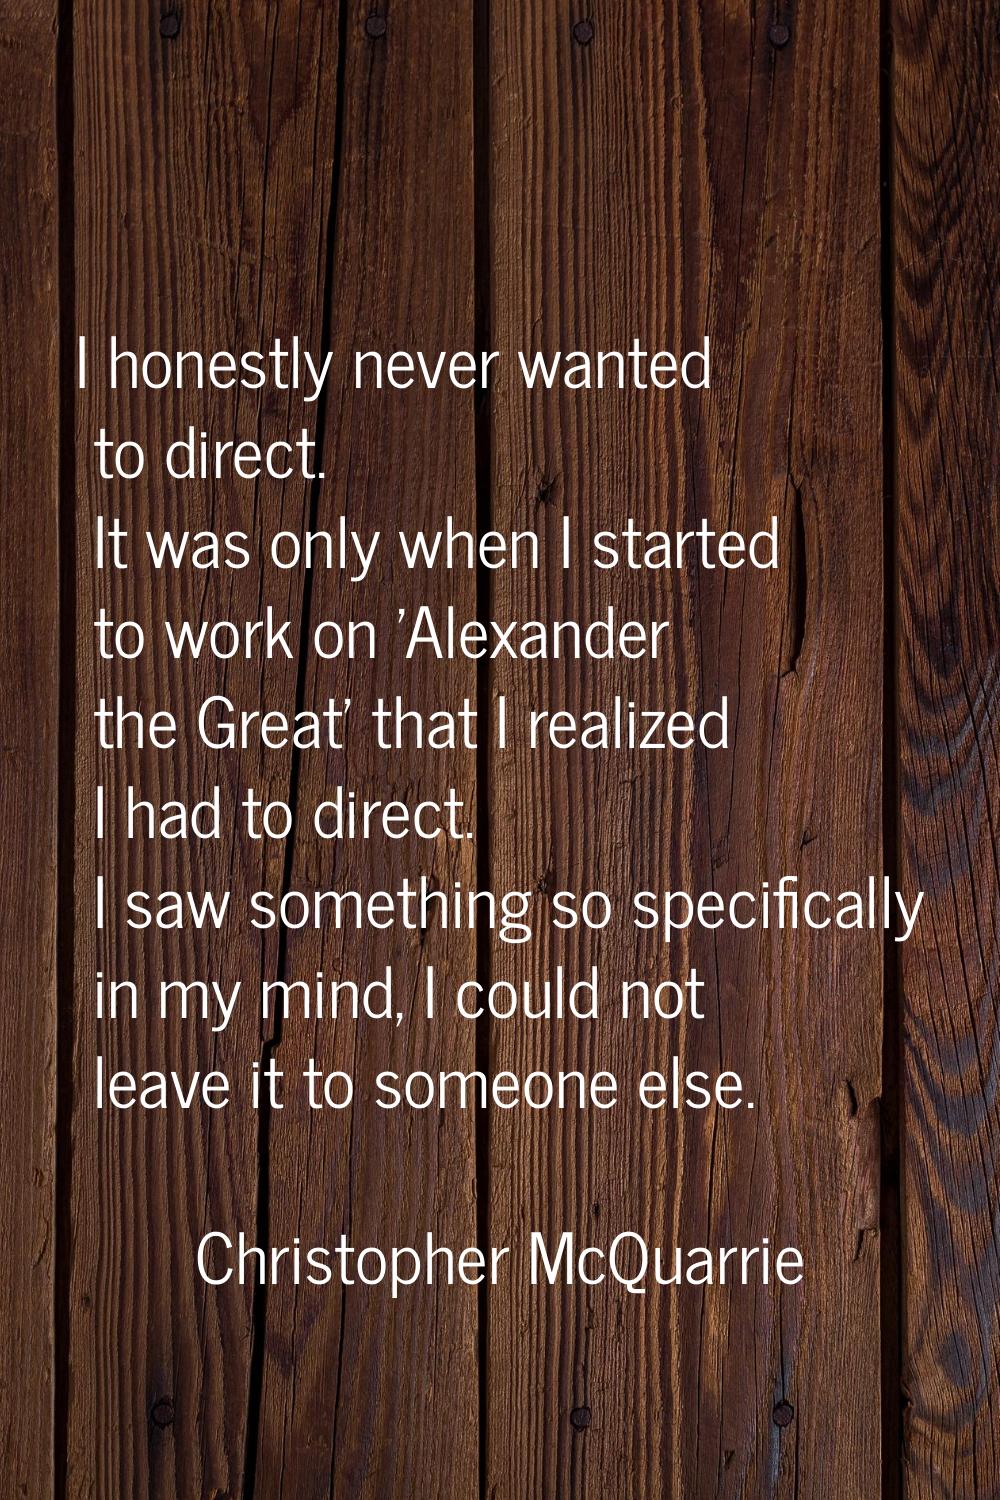 I honestly never wanted to direct. It was only when I started to work on 'Alexander the Great' that